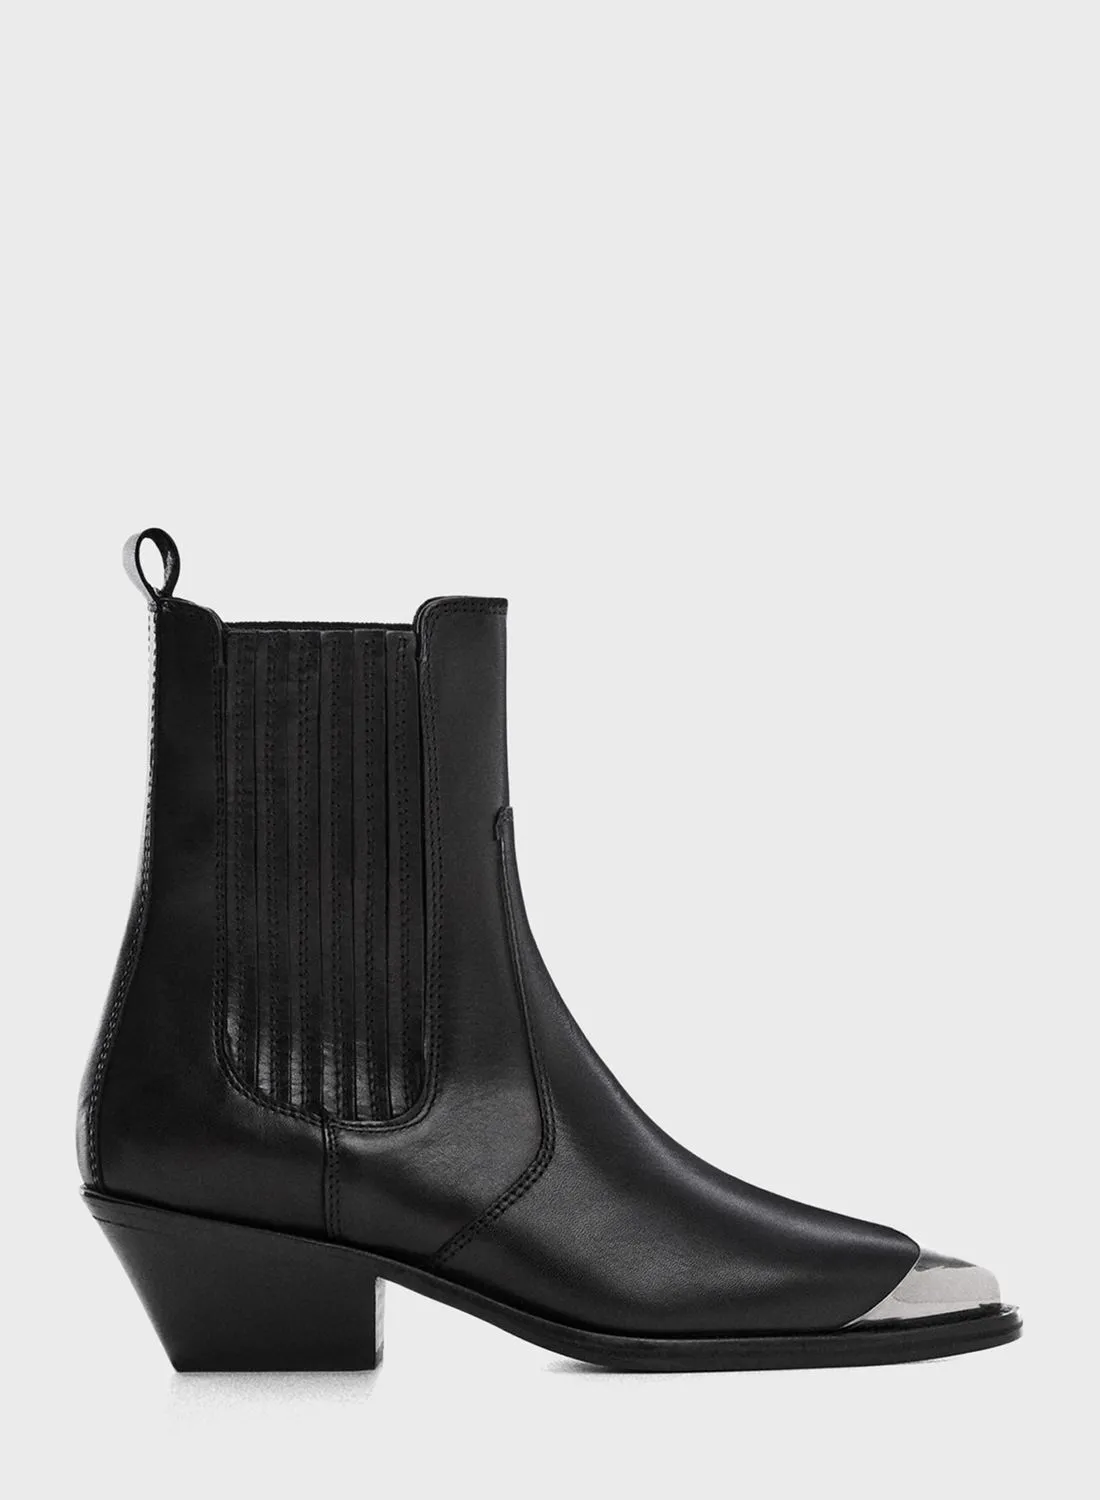 MANGO Metal Ankle Boots